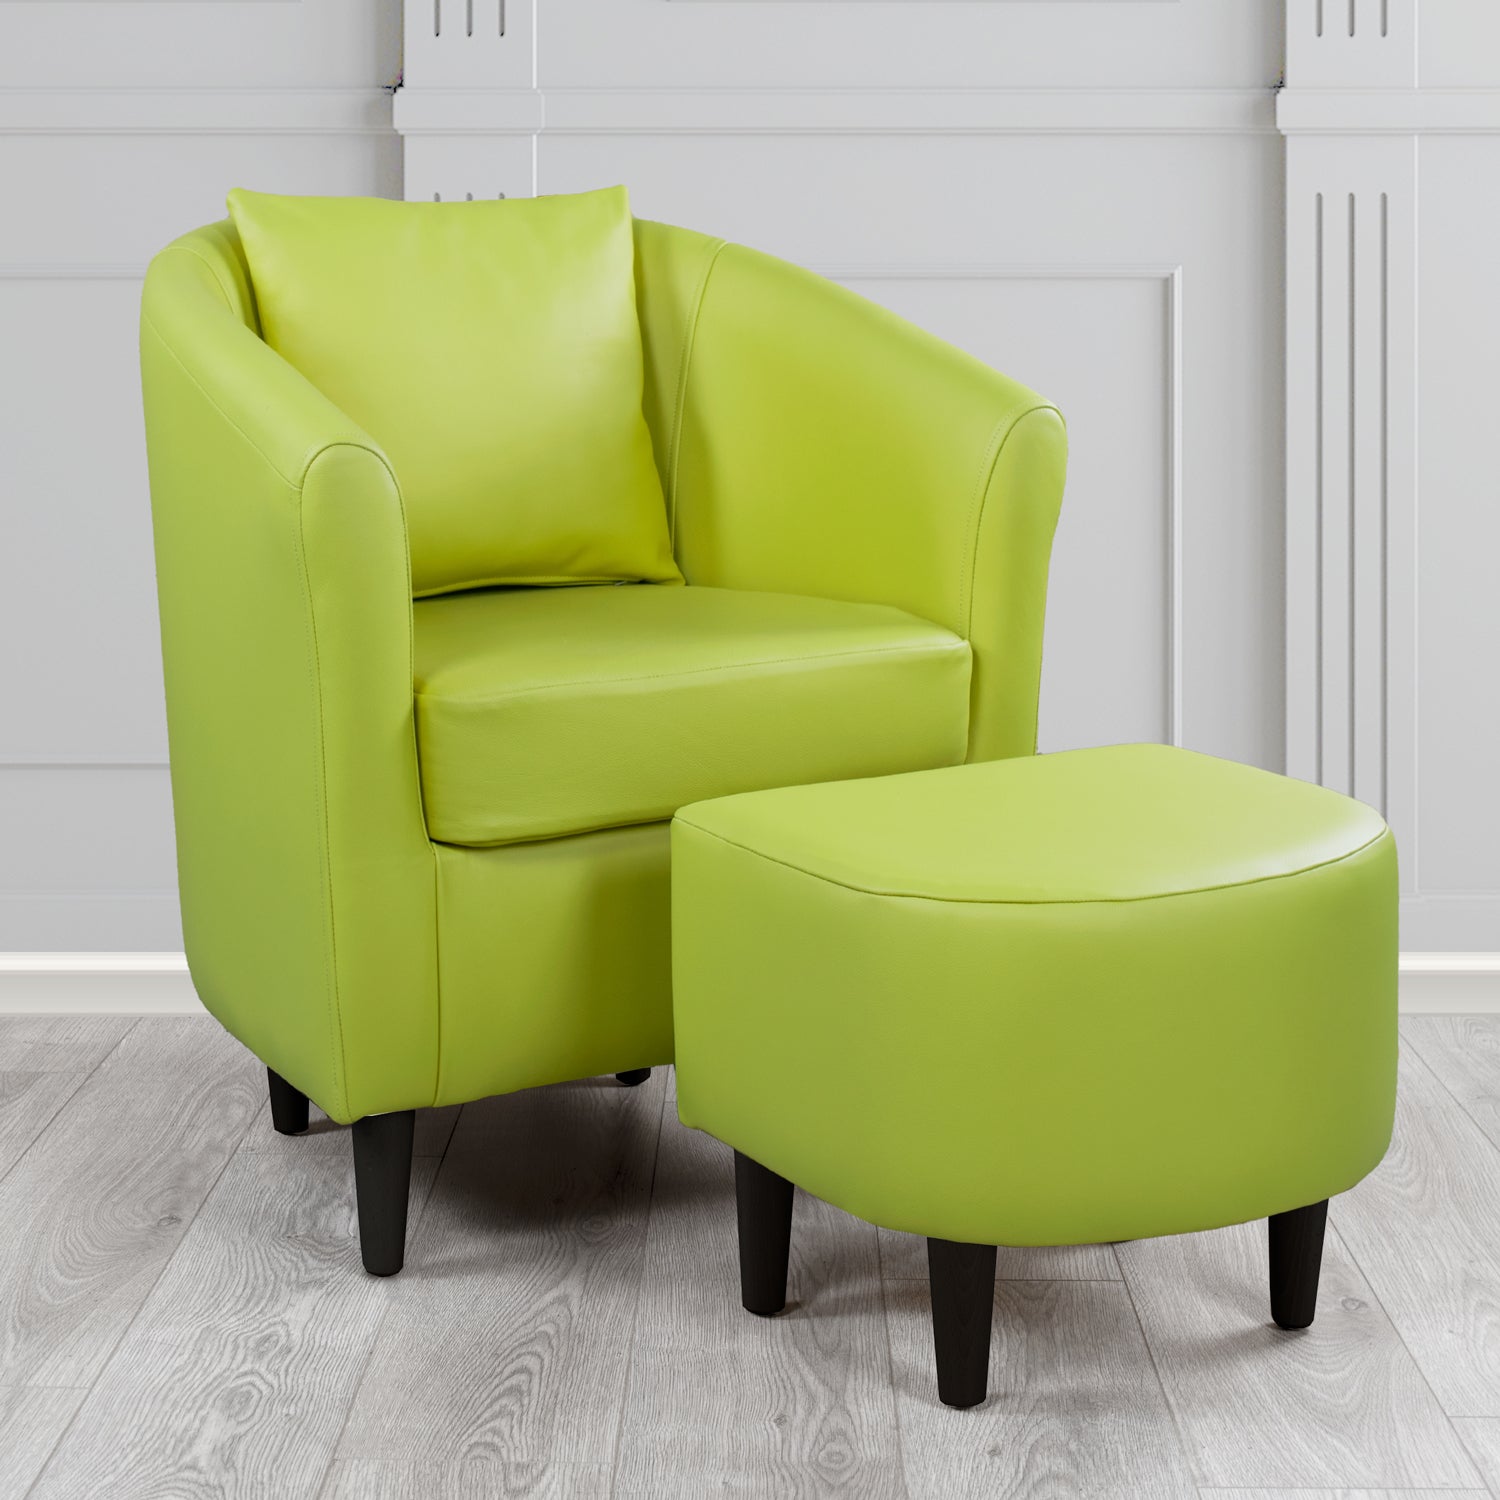 St Tropez Shelly Field Green Crib 5 Genuine Leather Tub Chair & Footstool Set With Scatter Cushion (6619492089898)